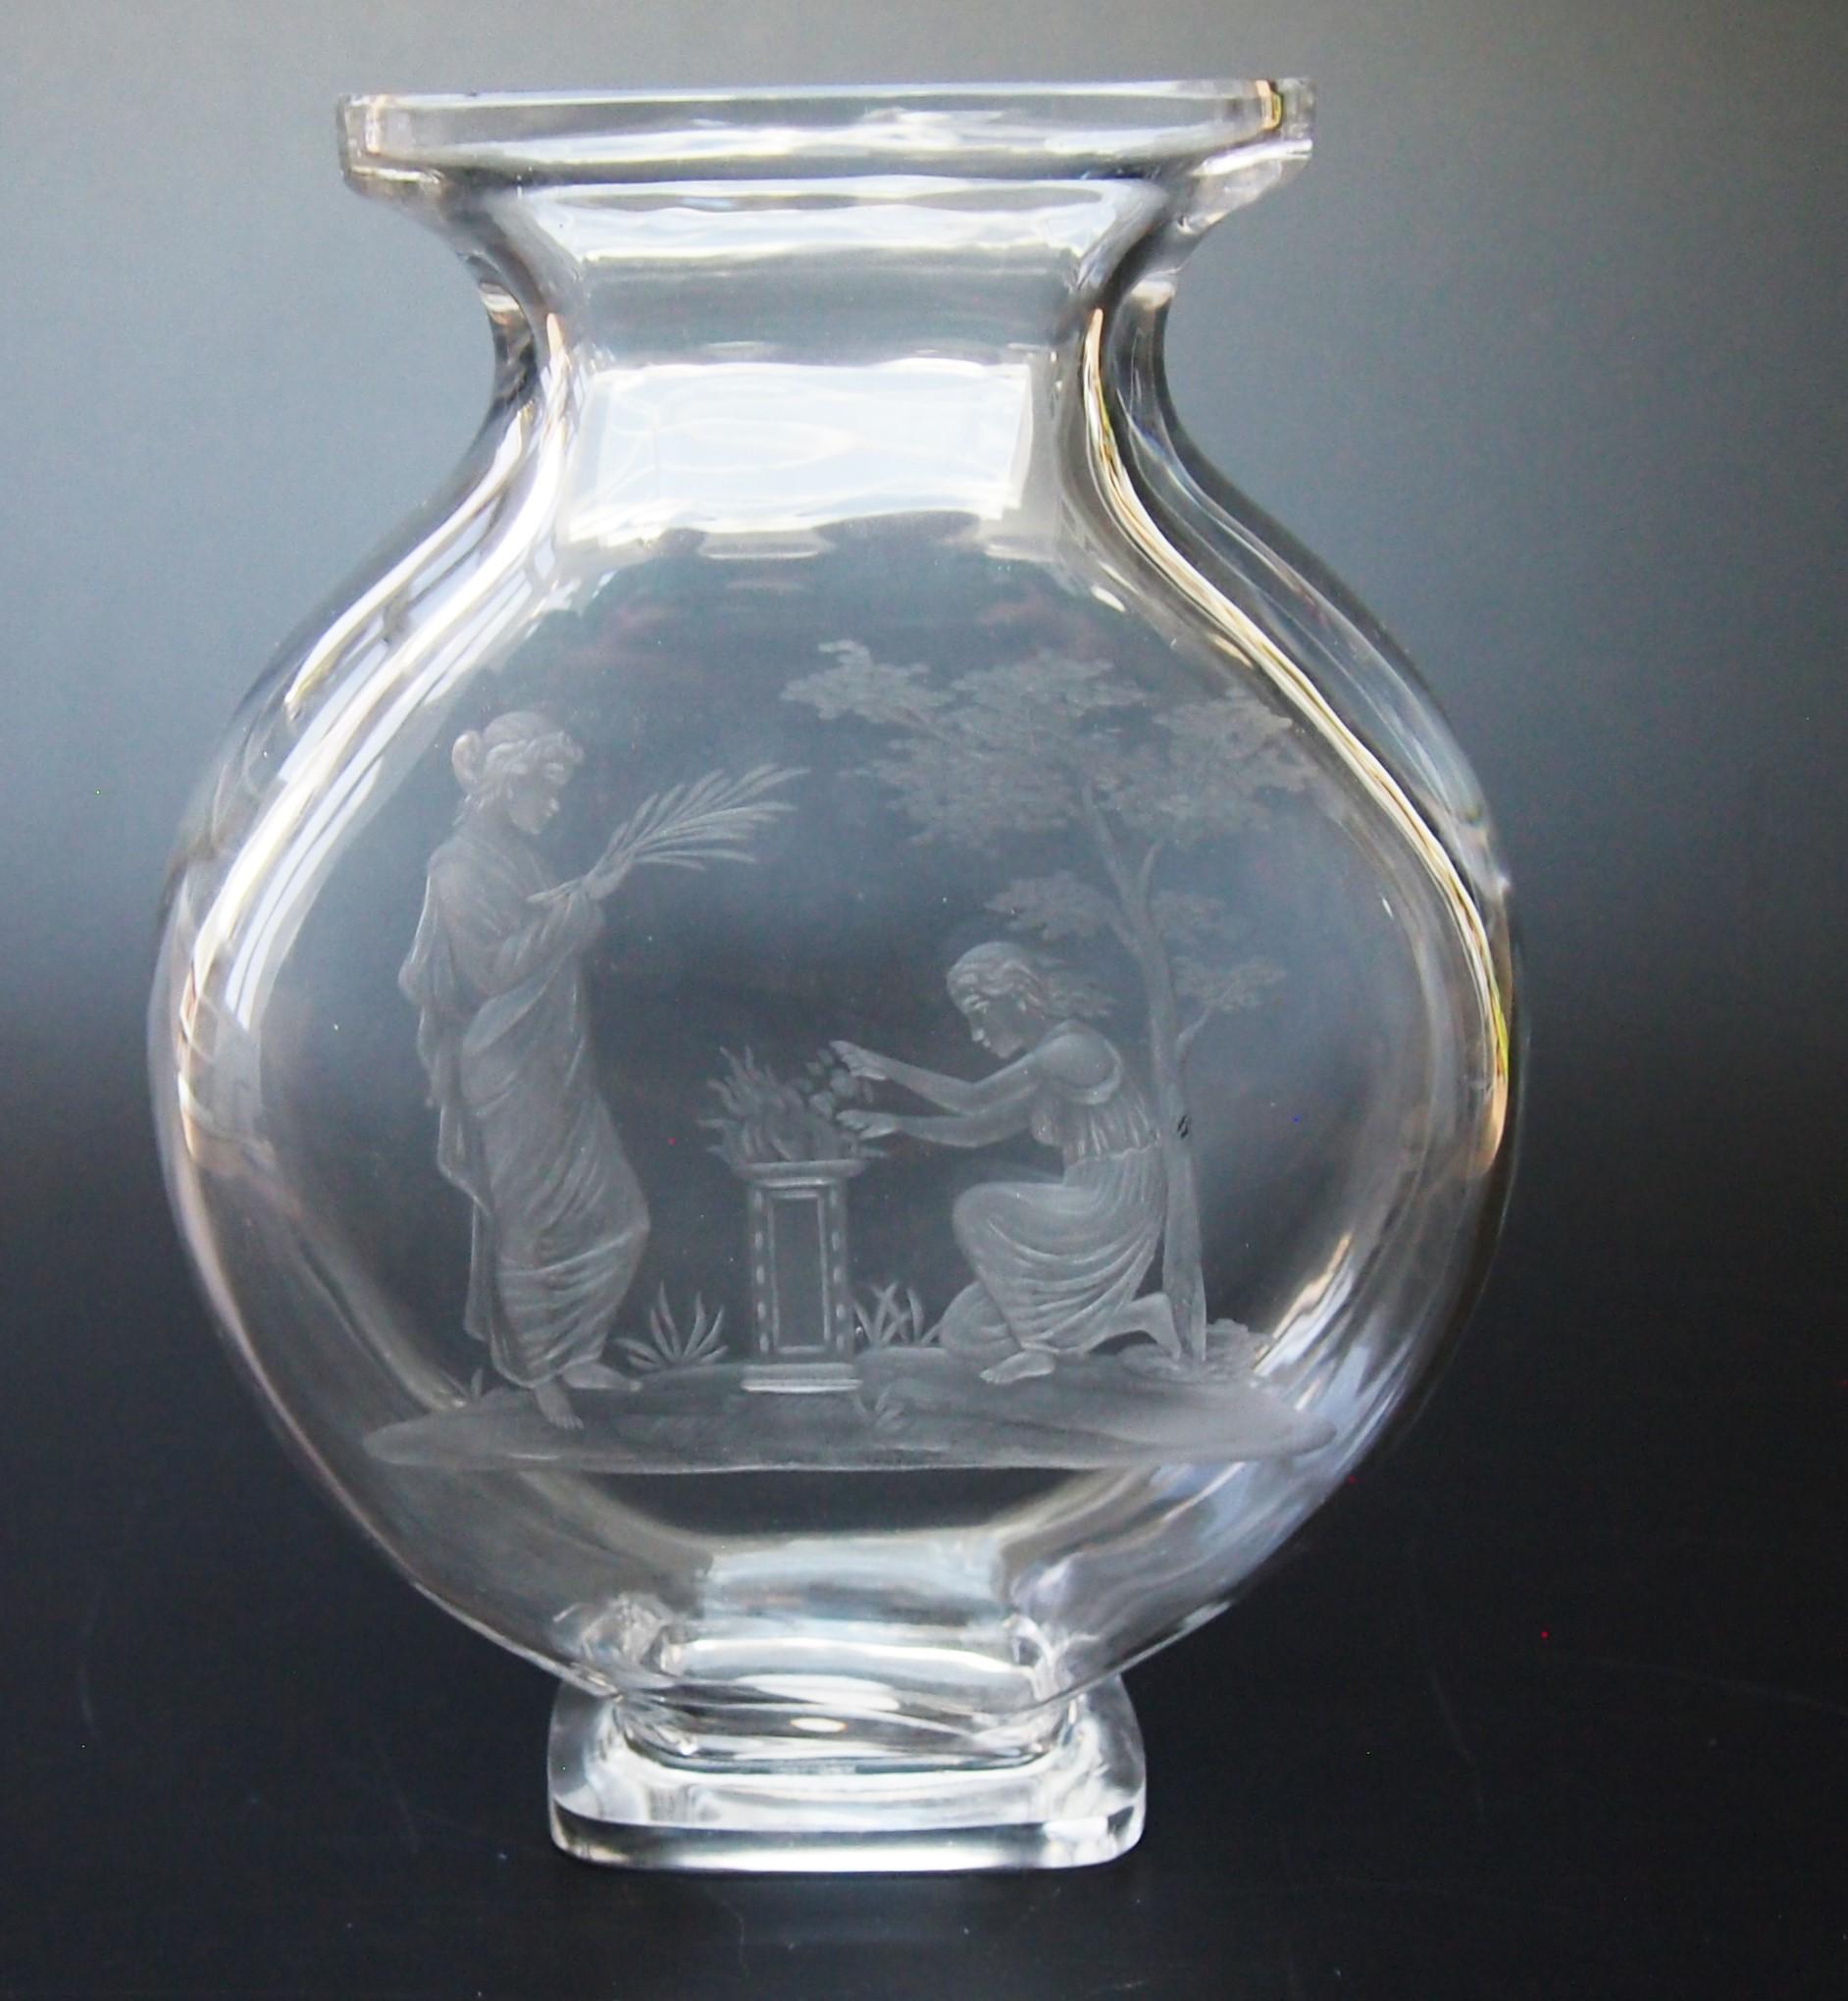 Fabulous, intaglio carved, Baccarat vase in the Aesthetic style dating around 1880. Depicting two classically dressed women arranging fruit and plants on a pedestal with a landscape background with a large finely detailed tree. As usual with such